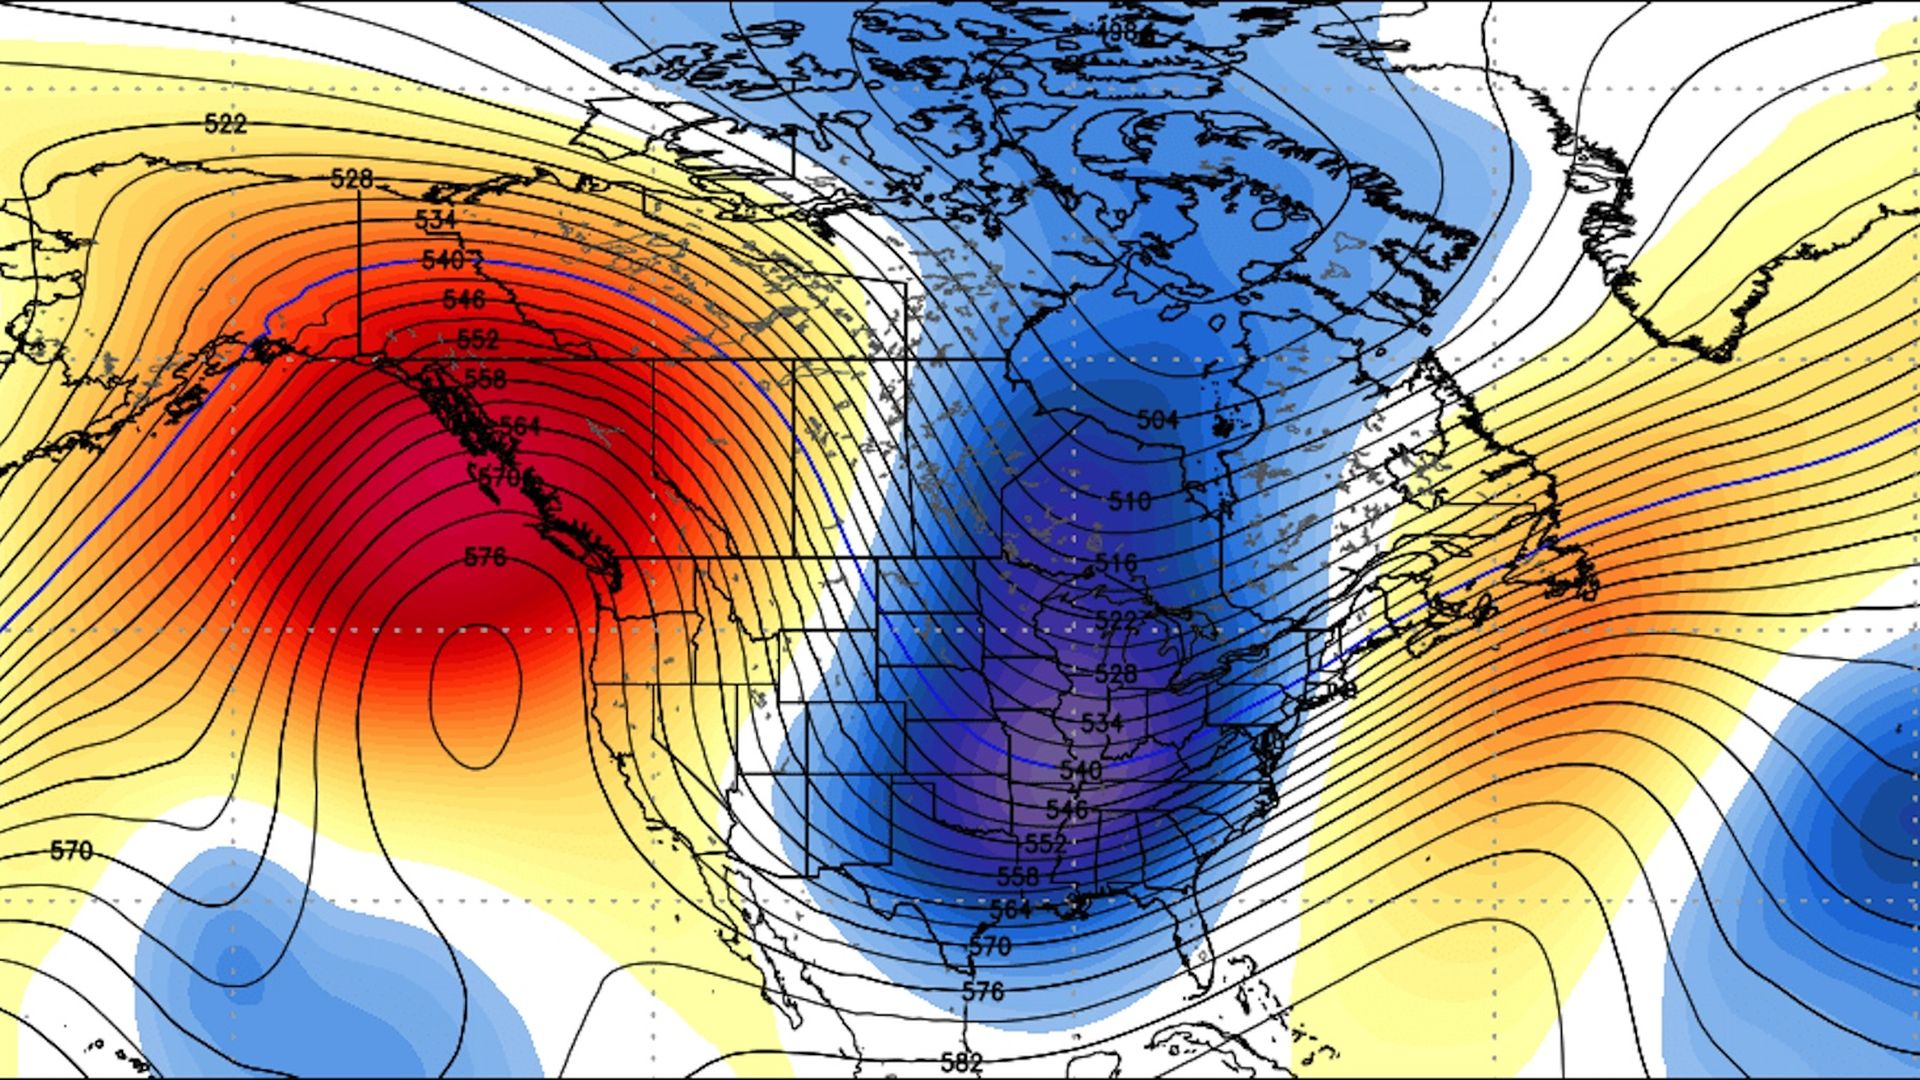 Computer model projection showing a deep trough over the Midwest and East Coast with much colder than average conditions in late January 2019.